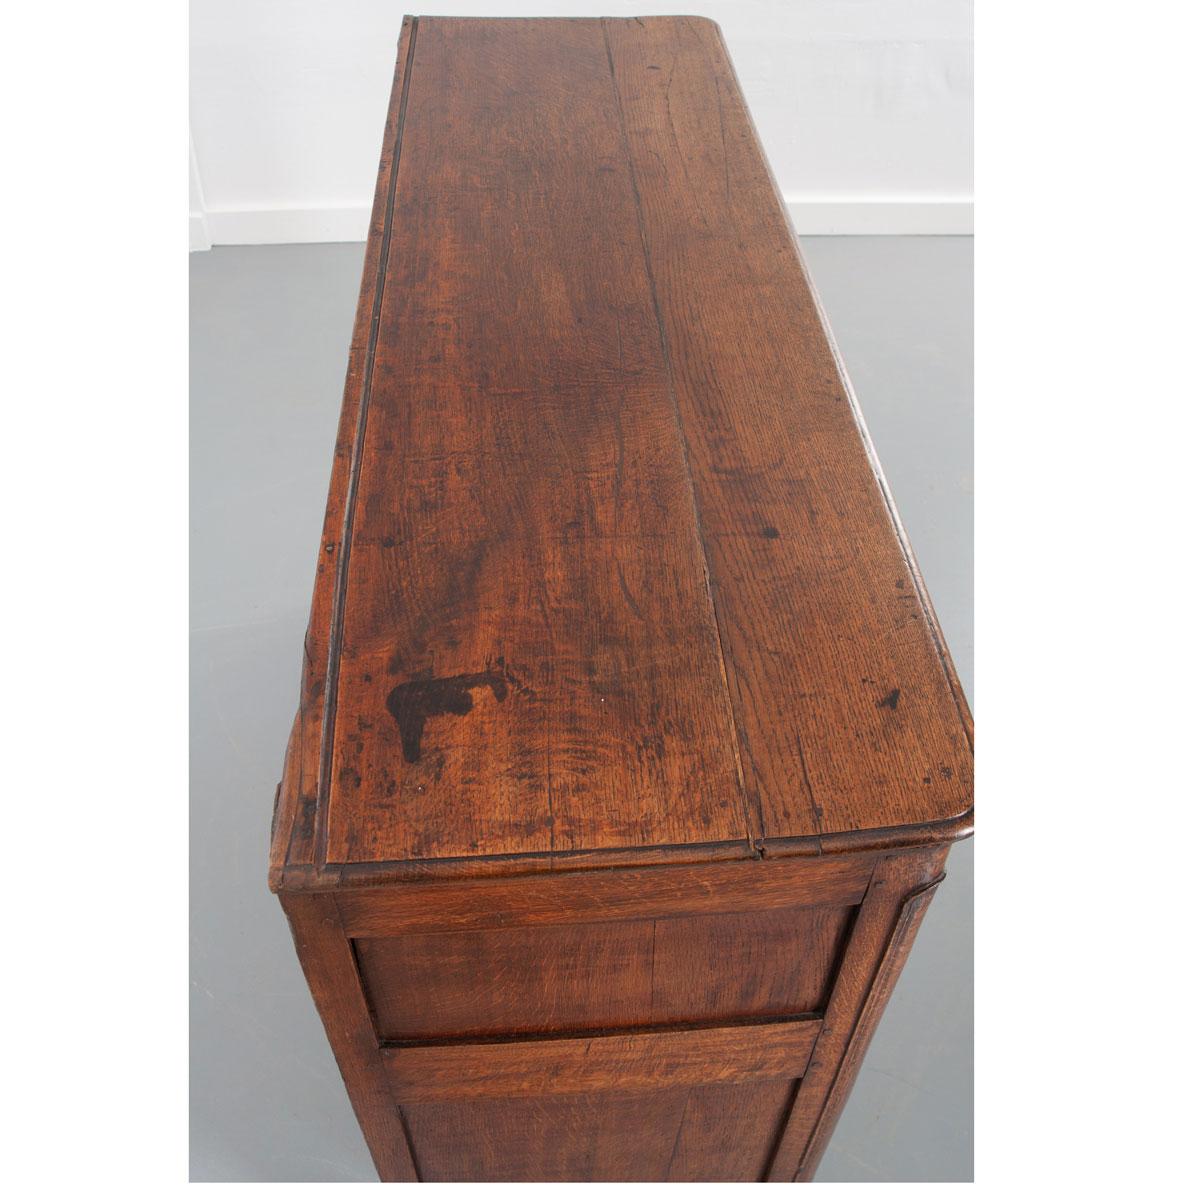 A fantastic Provincial buffet, made of quarter sawn oak, from 1780s, France. This beautiful solid oak case antique features exceptional decorative carvings, all done by hand, that are found on antiques dating to the countryside in this time period.